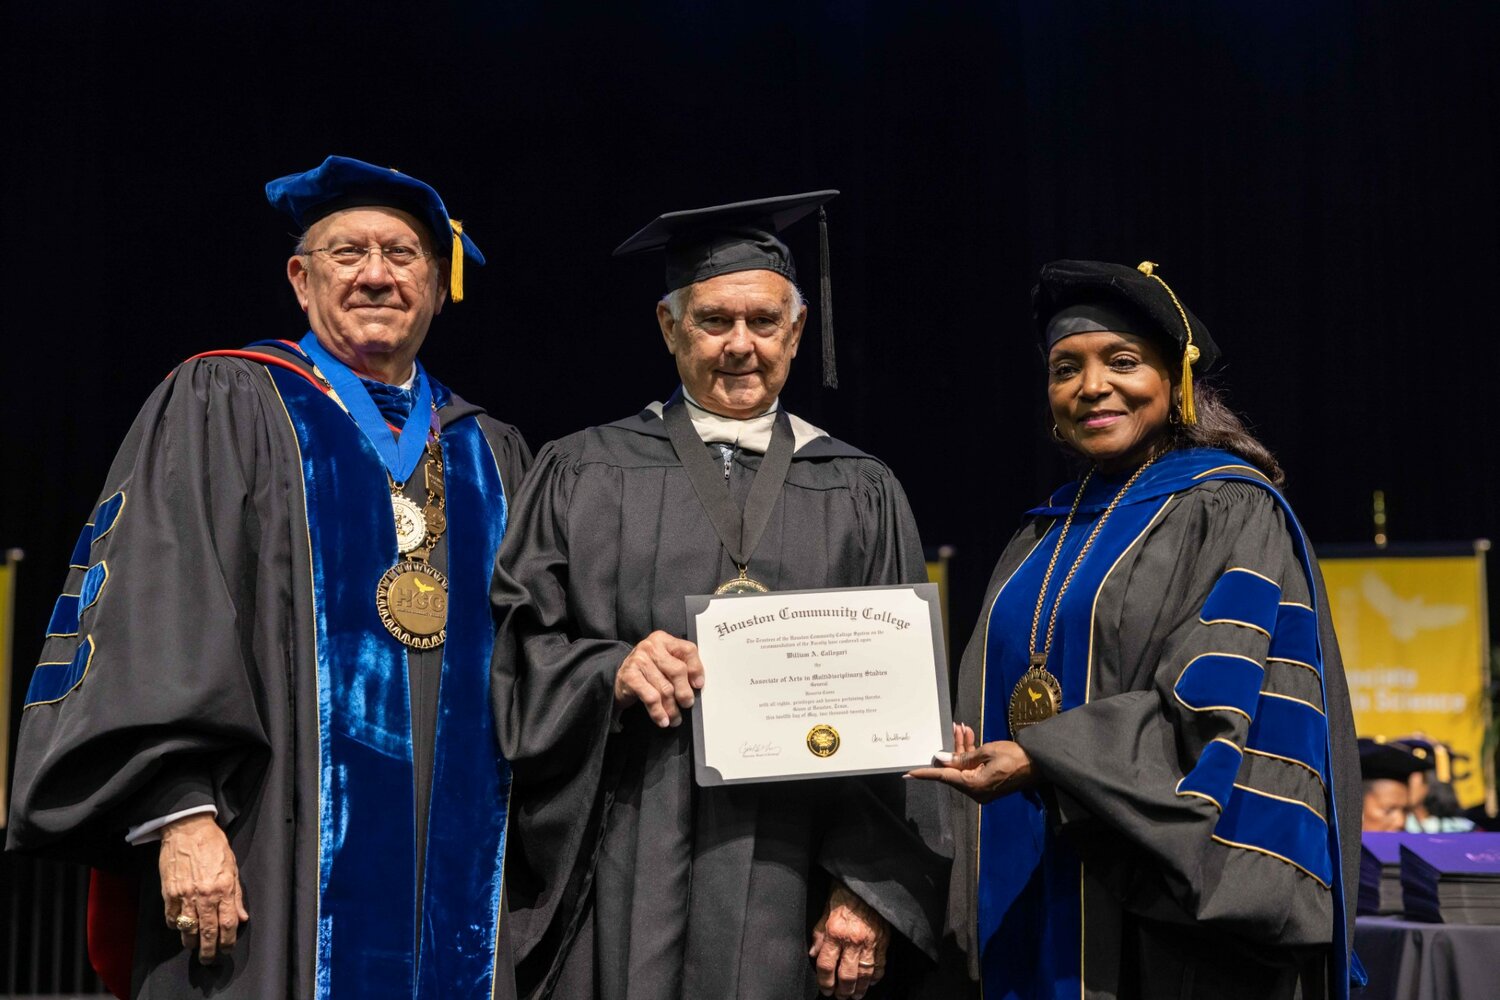 Former state Rep. Bill Callegari, center, of Katy received an honorary degree from Houston Community College for his longstanding support.